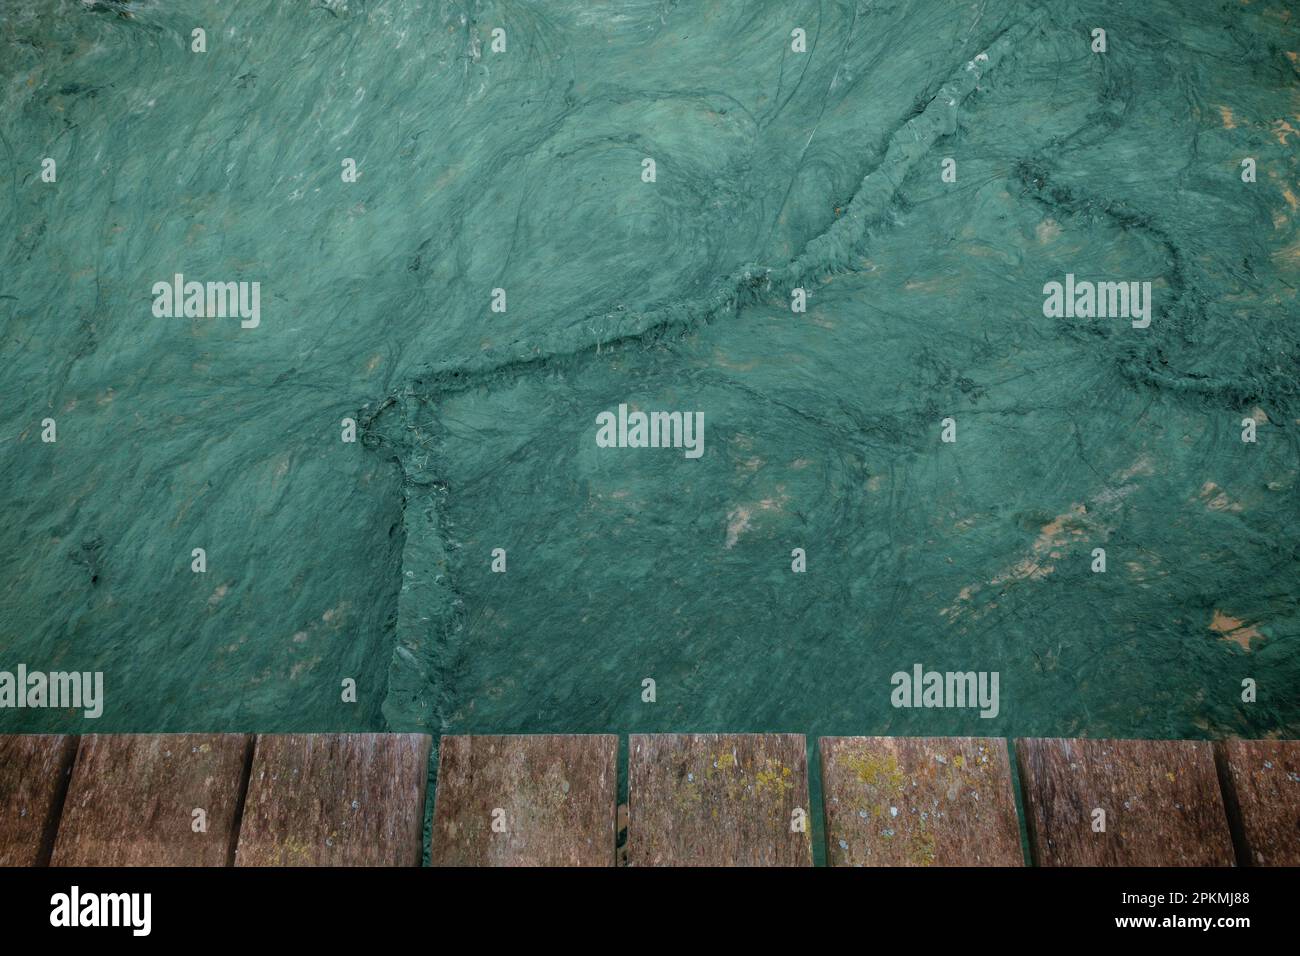 Nature background made up of seaweed deposited on the sand under the wooden boards of a pier Stock Photo